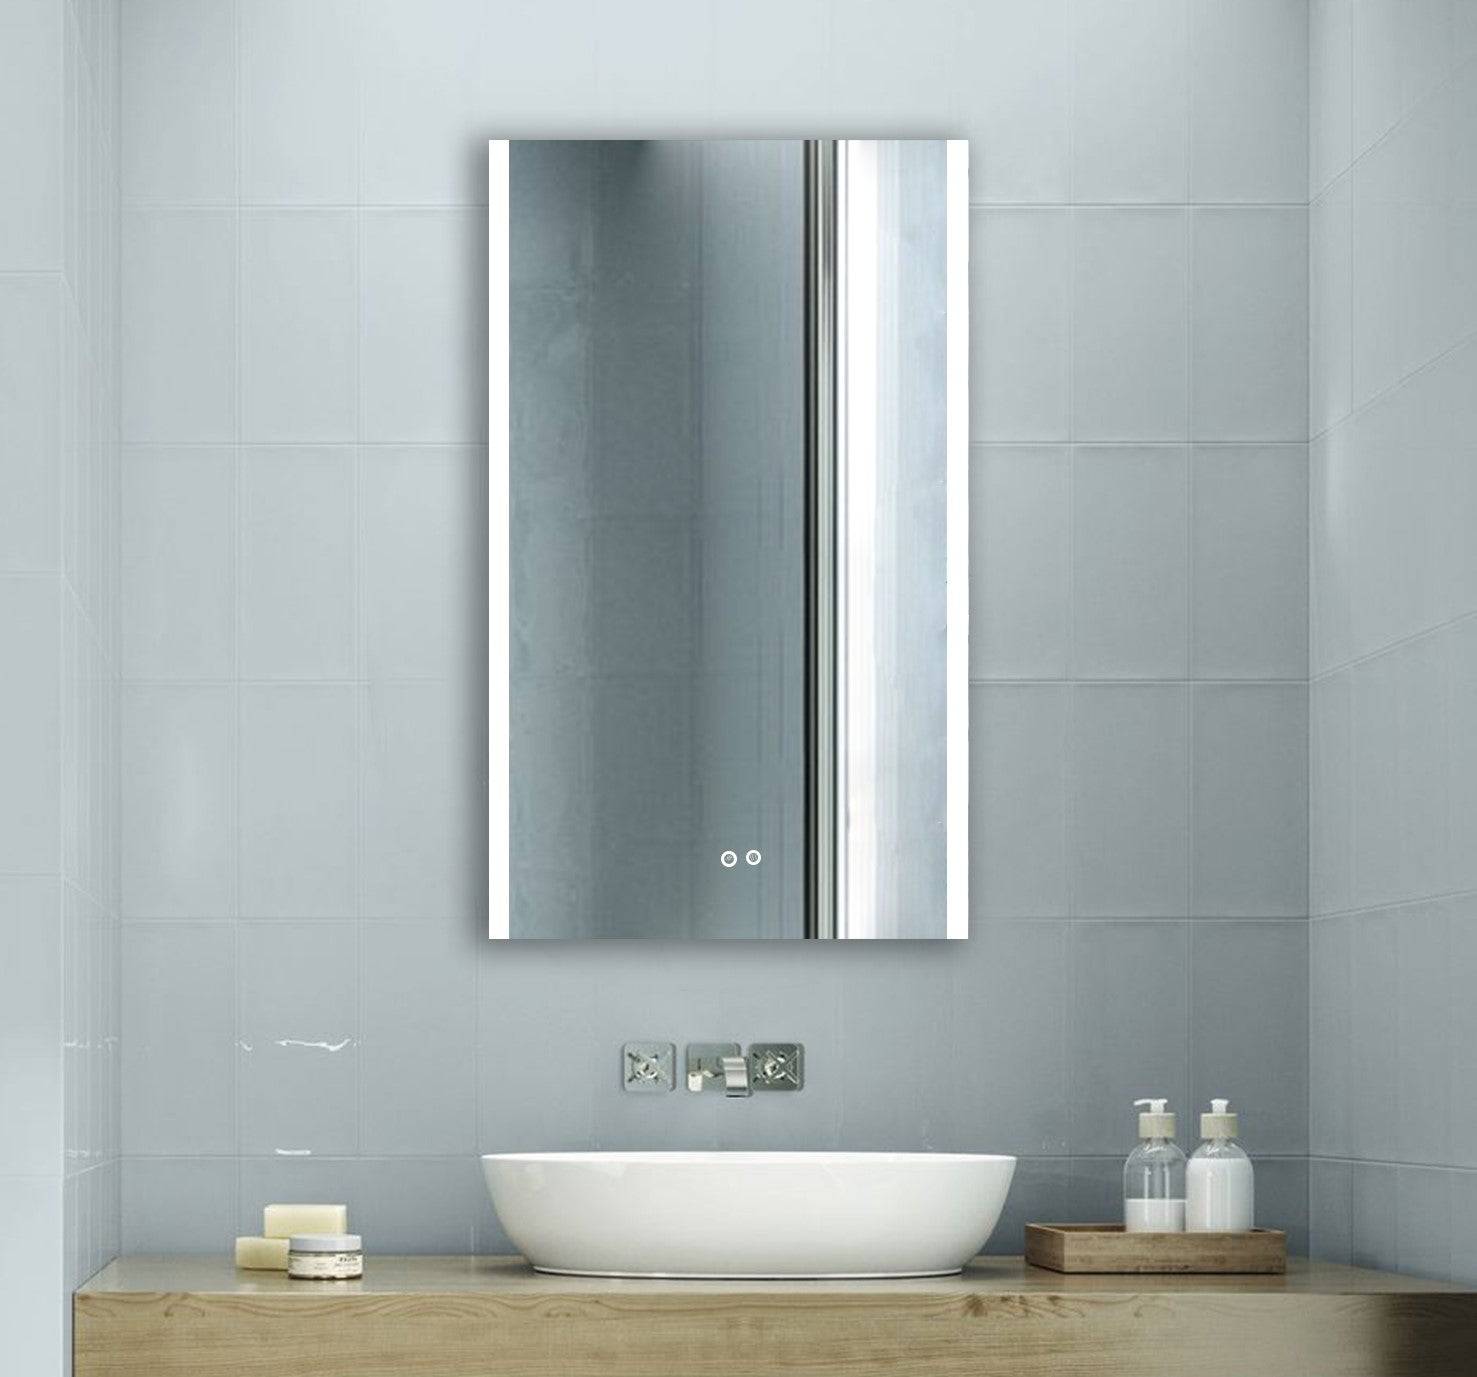 ELL Polar Series- Premium Vertical LED Mirror with Defogger - 5mm Copper-Free Glass, Adjustable Color Temperature, Touch Switch, ETL Listed & IP44 Rated, Vertical or Horizontal Mounting - Eco LED Lightings 